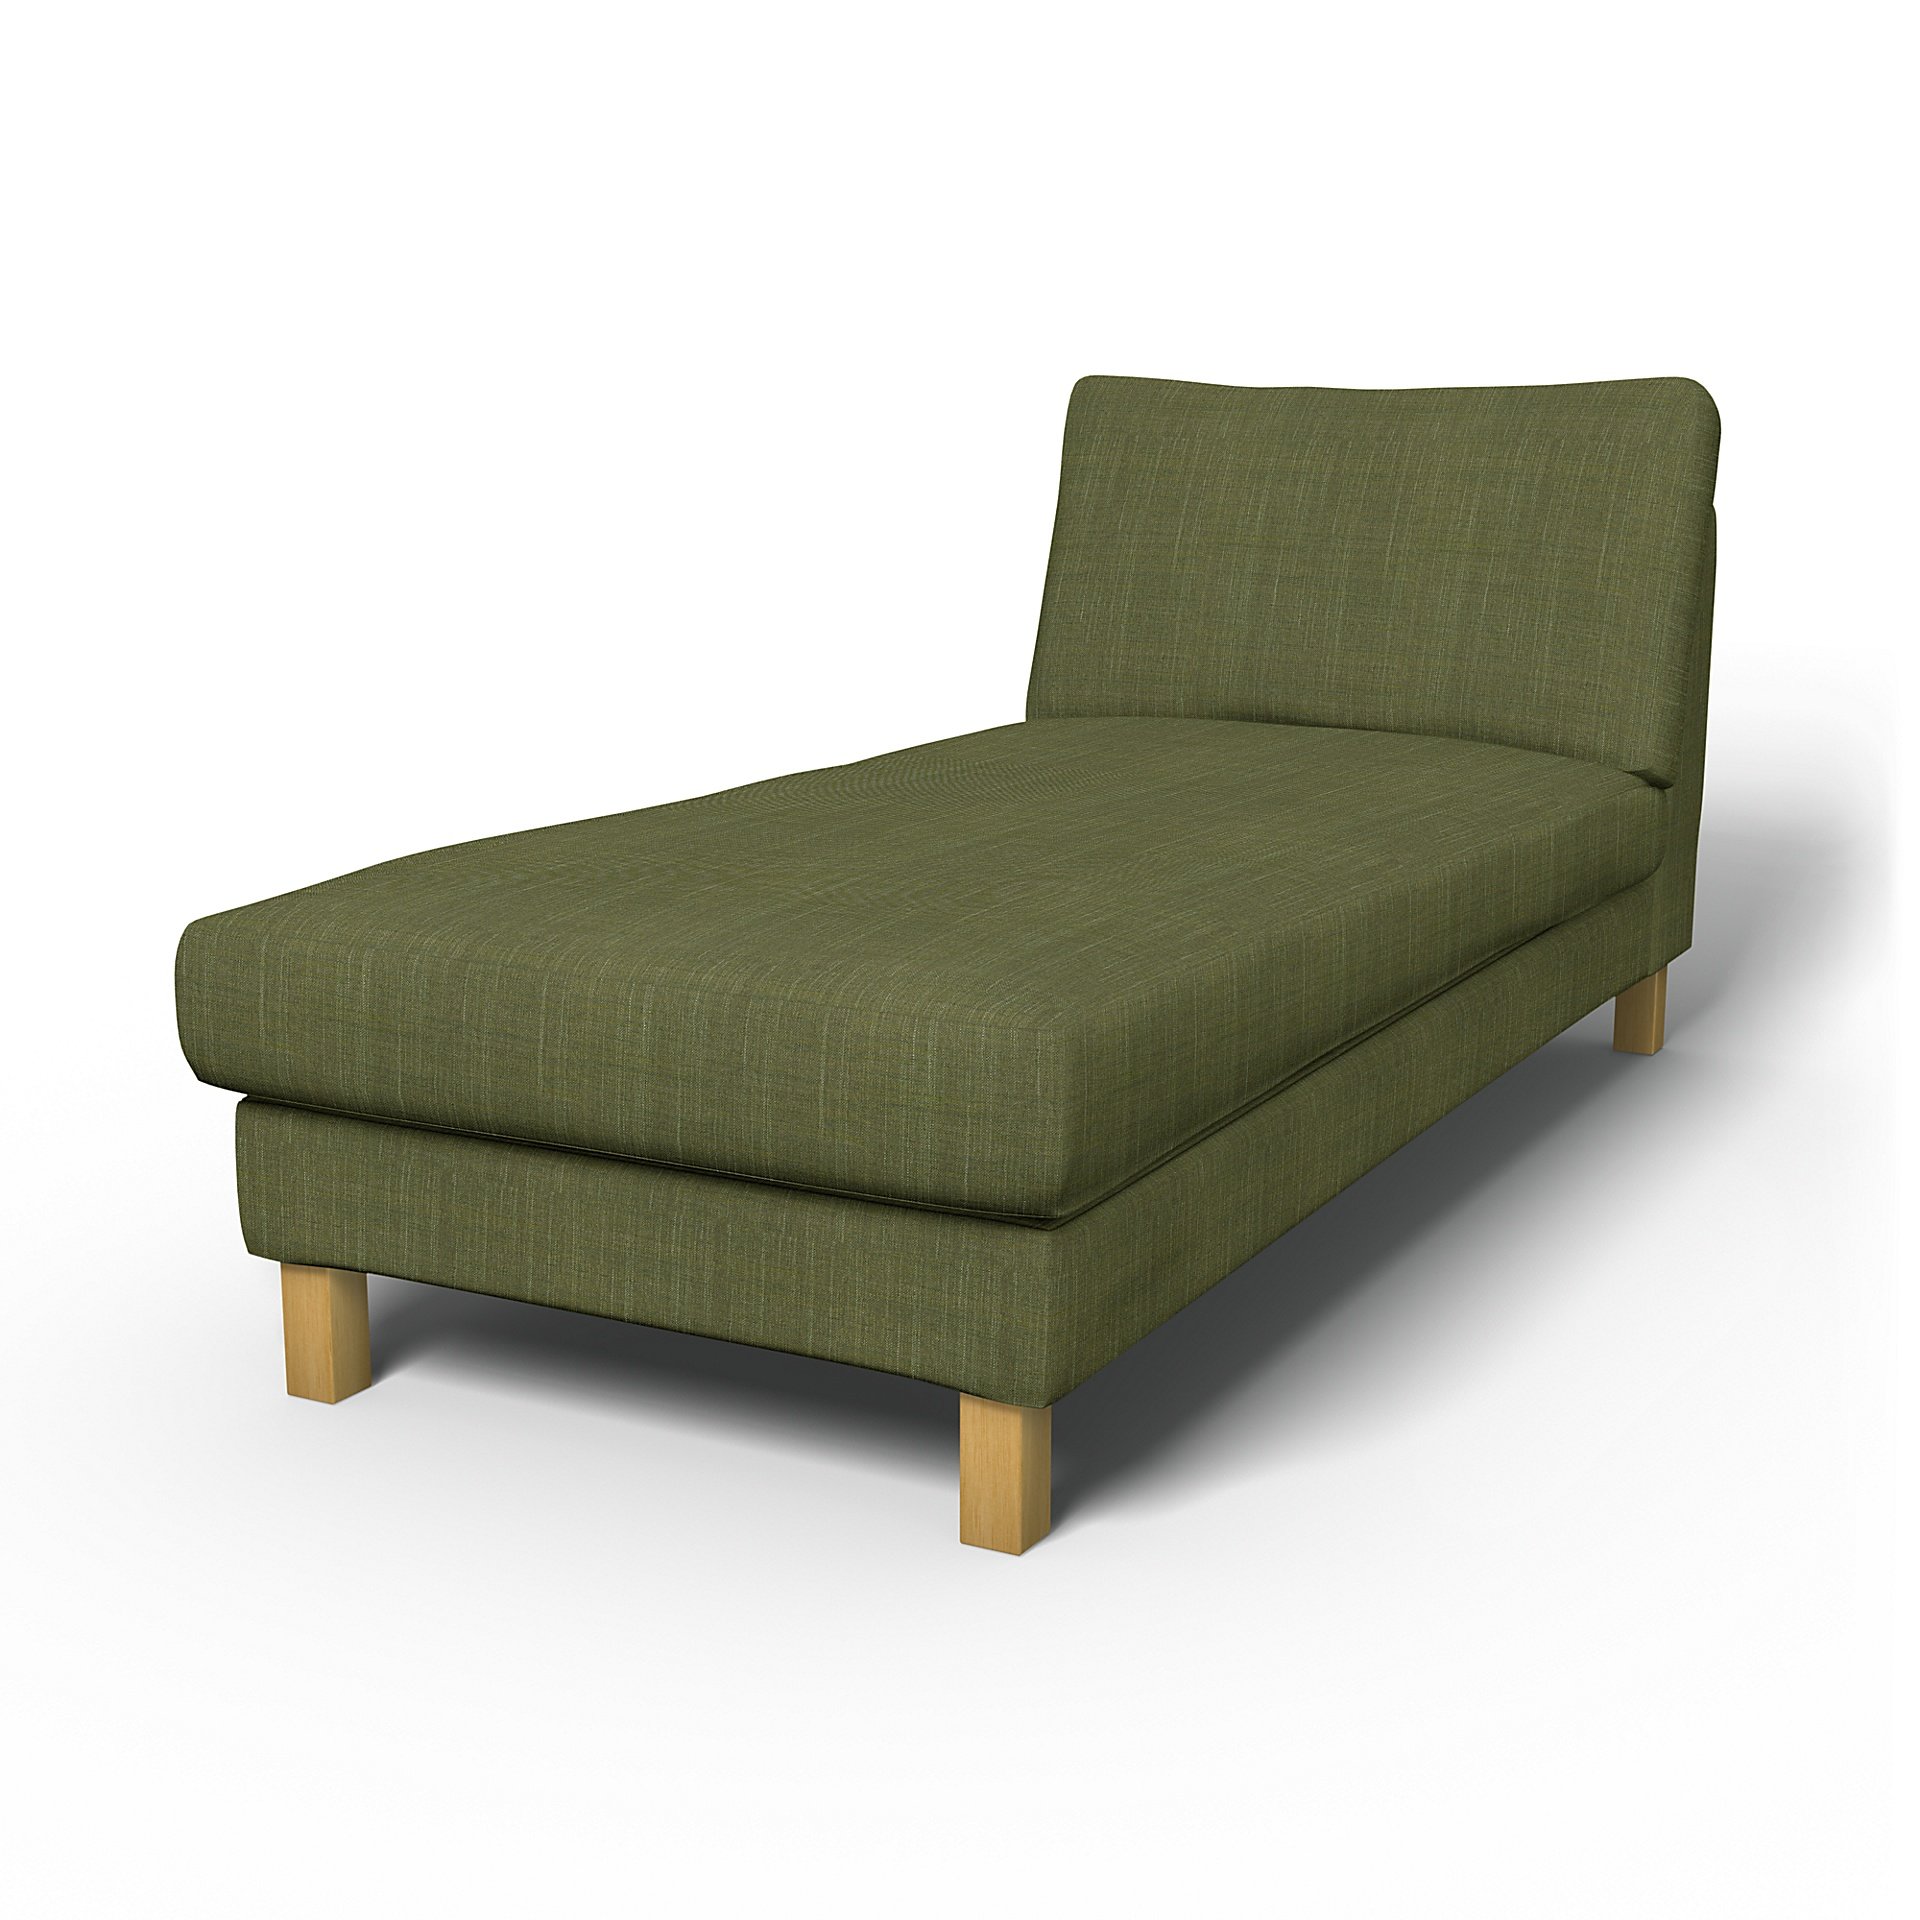 IKEA - Karlstad Stand Alone Chaise Longue Cover, Moss Green, Boucle & Texture - Bemz